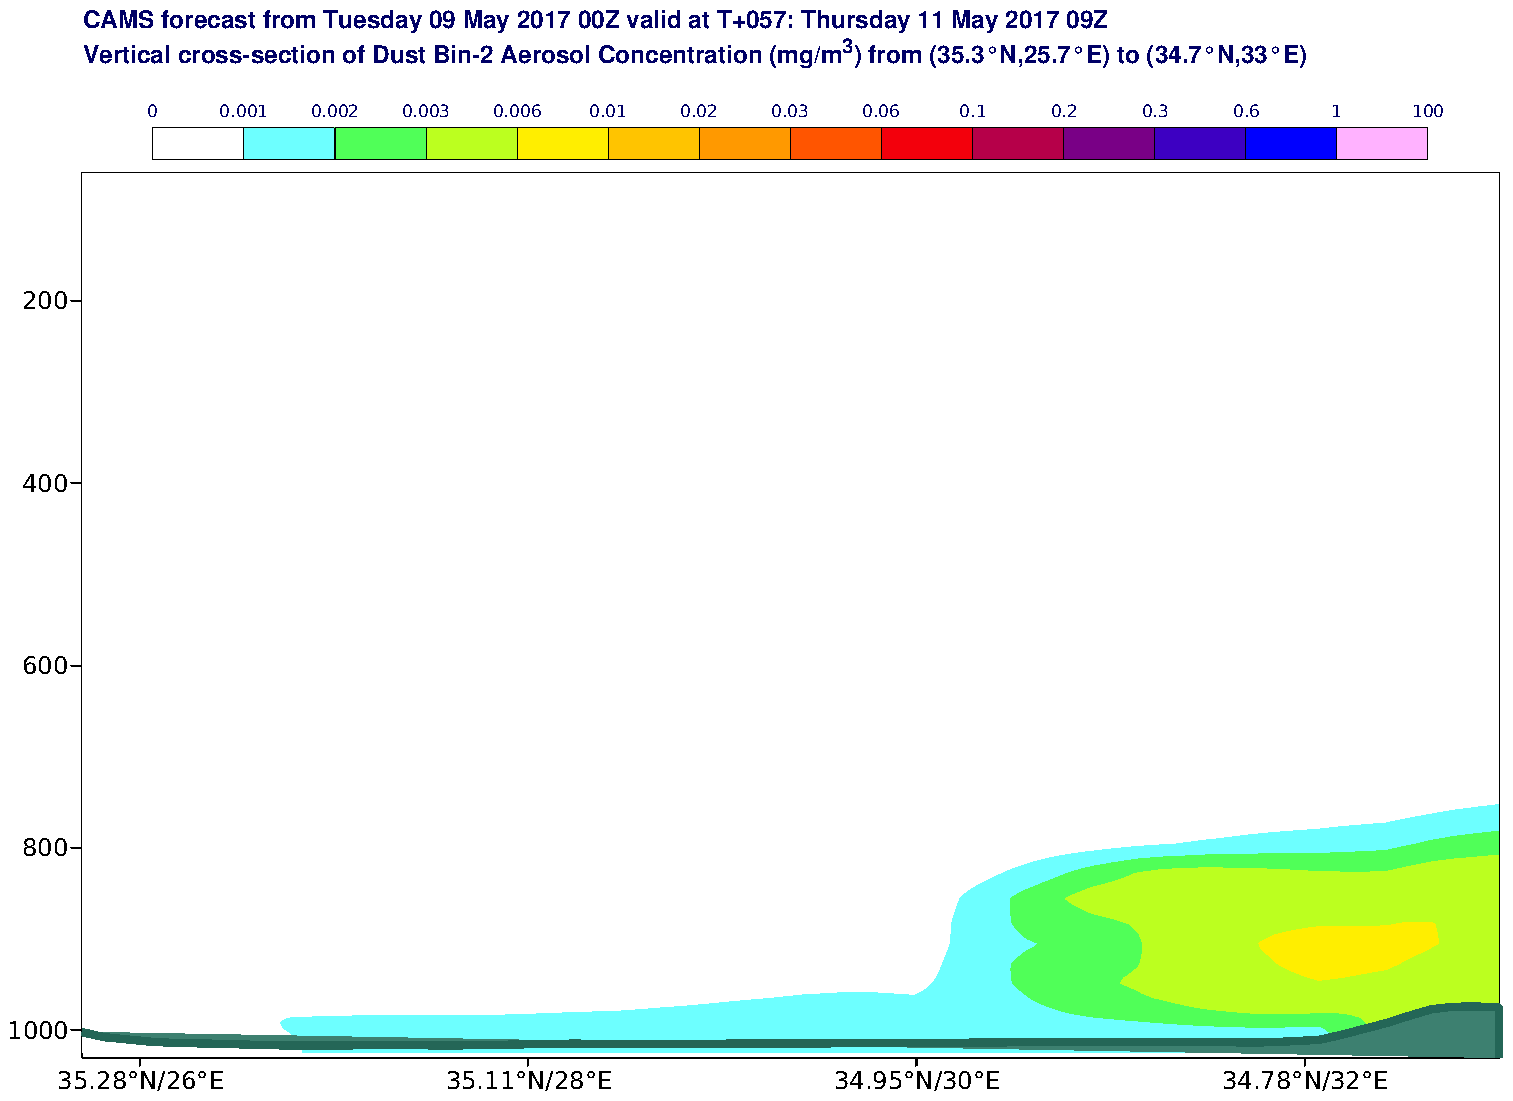 Vertical cross-section of Dust Bin-2 Aerosol Concentration (mg/m3) valid at T57 - 2017-05-11 09:00